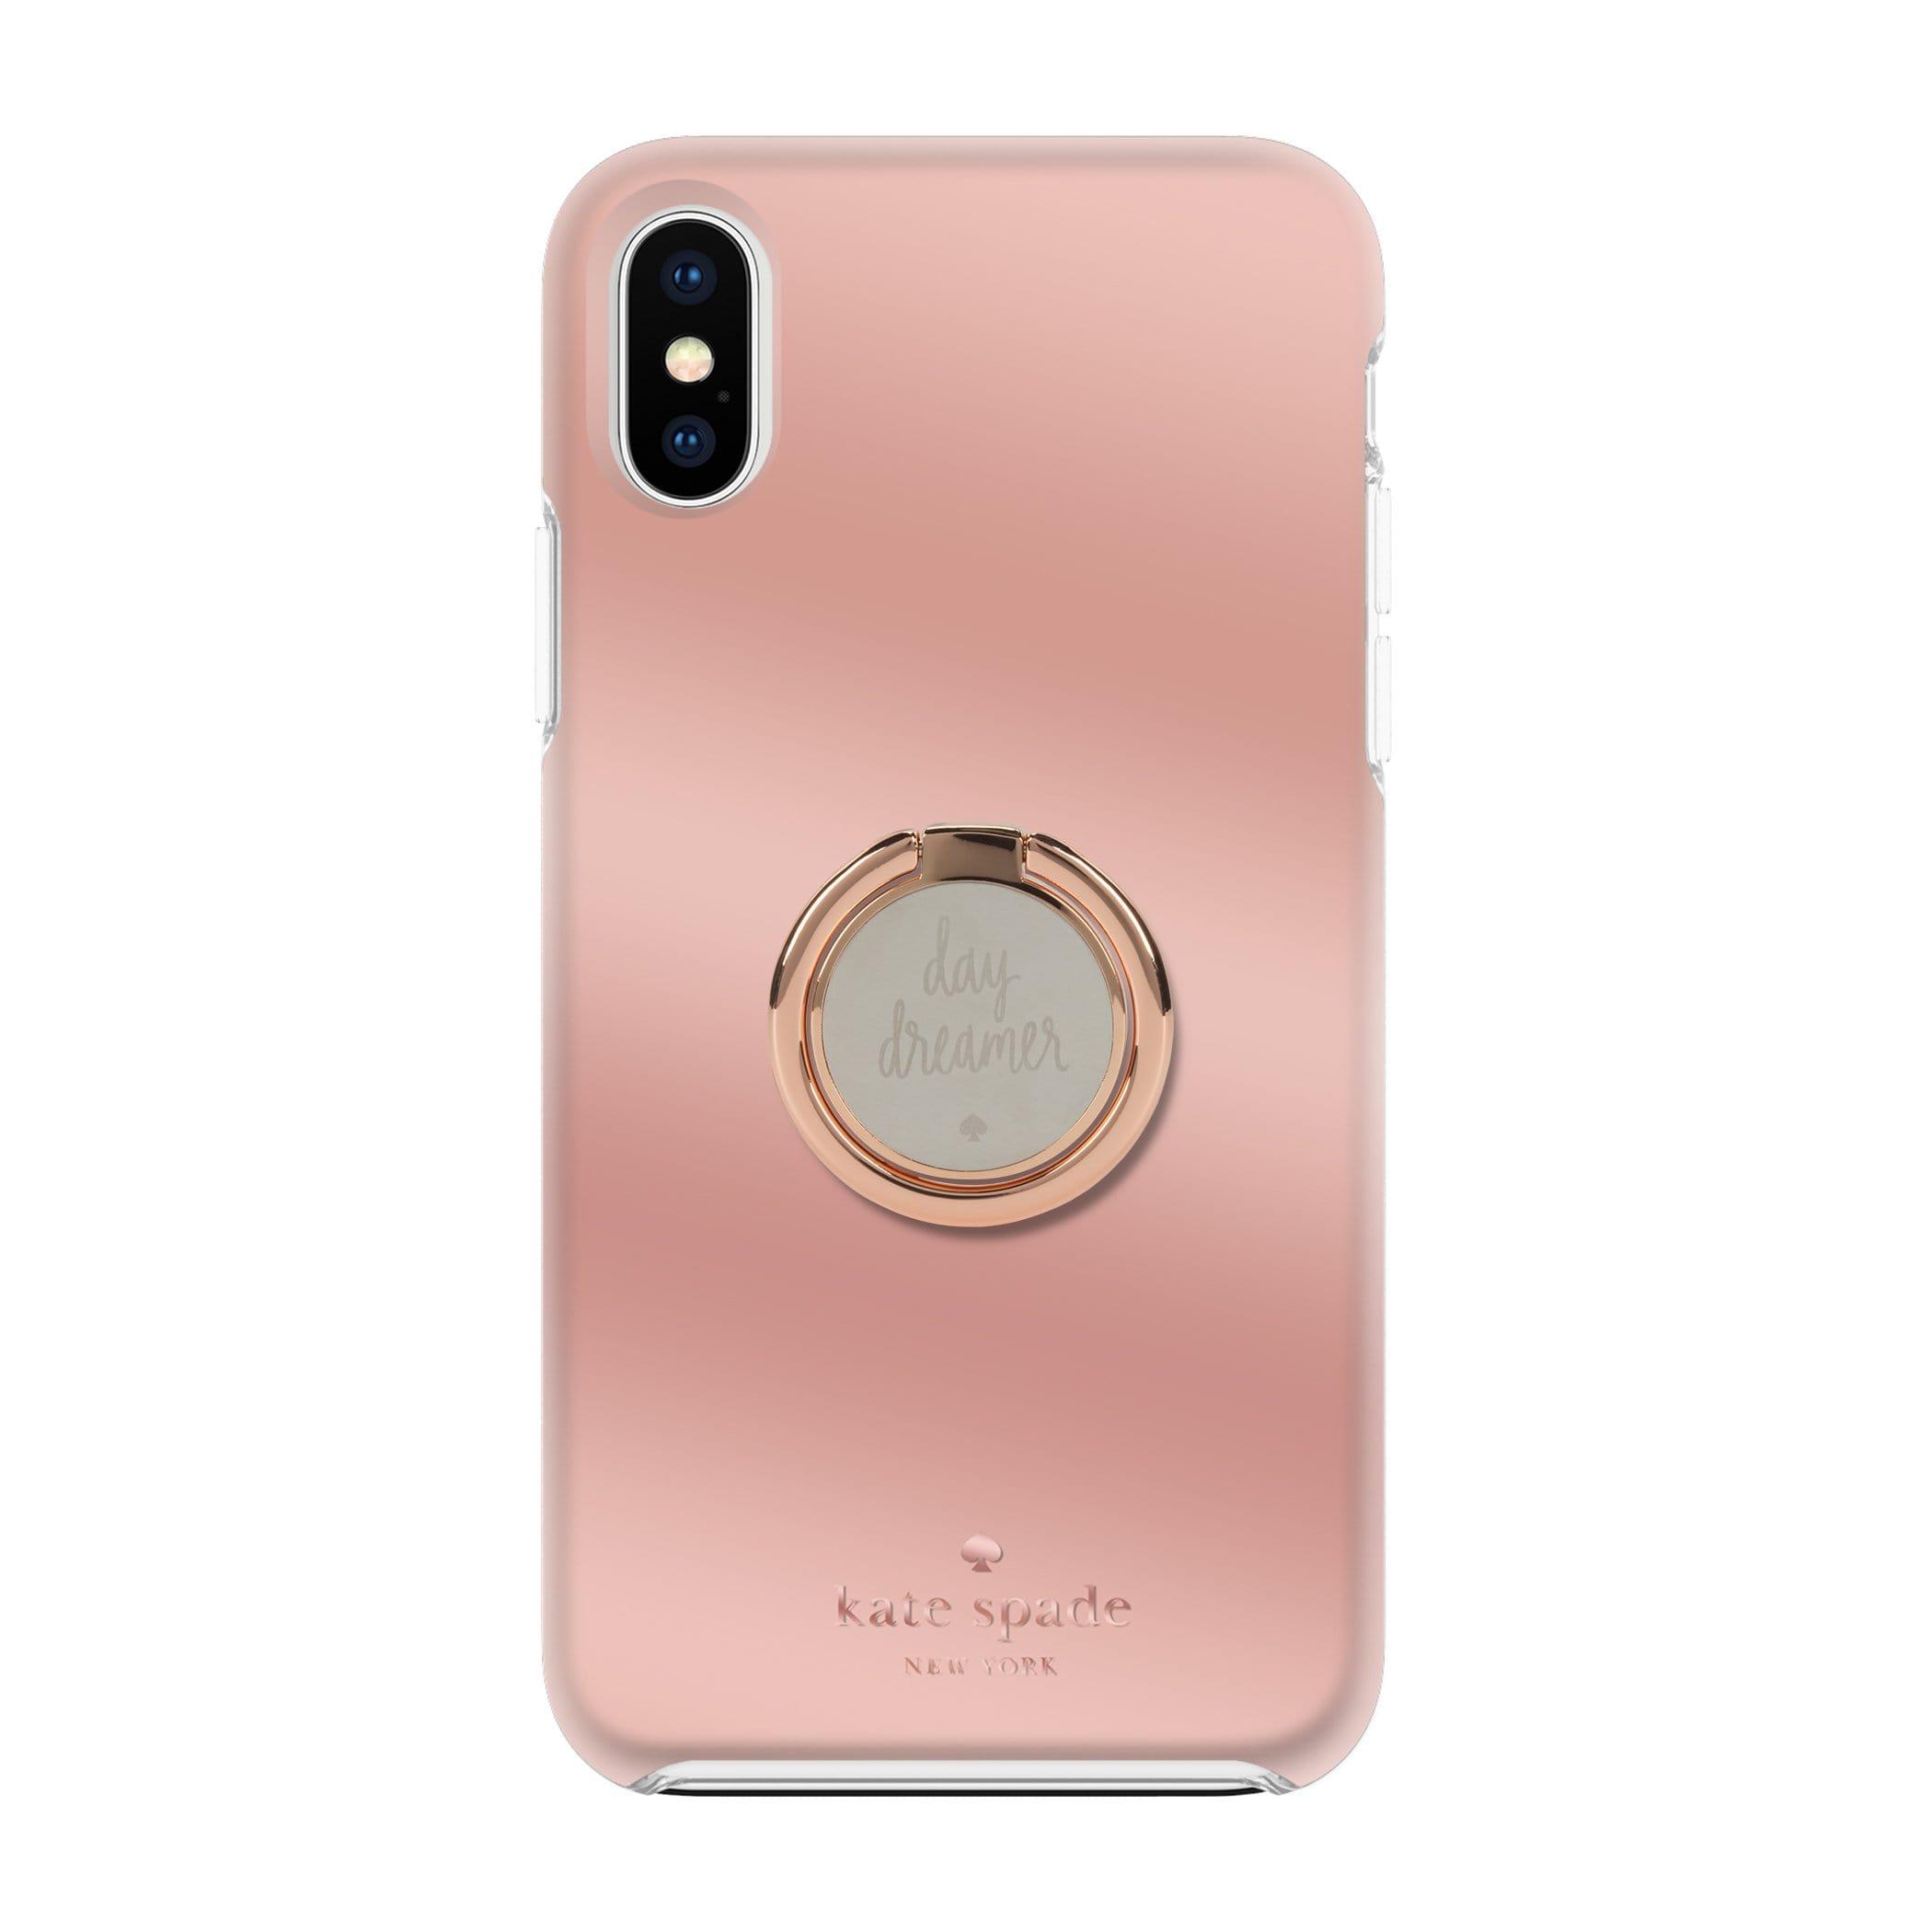 kate spade new york iphone xs max gift set ring stand protective hardshell case scallop rose gold glitter clear